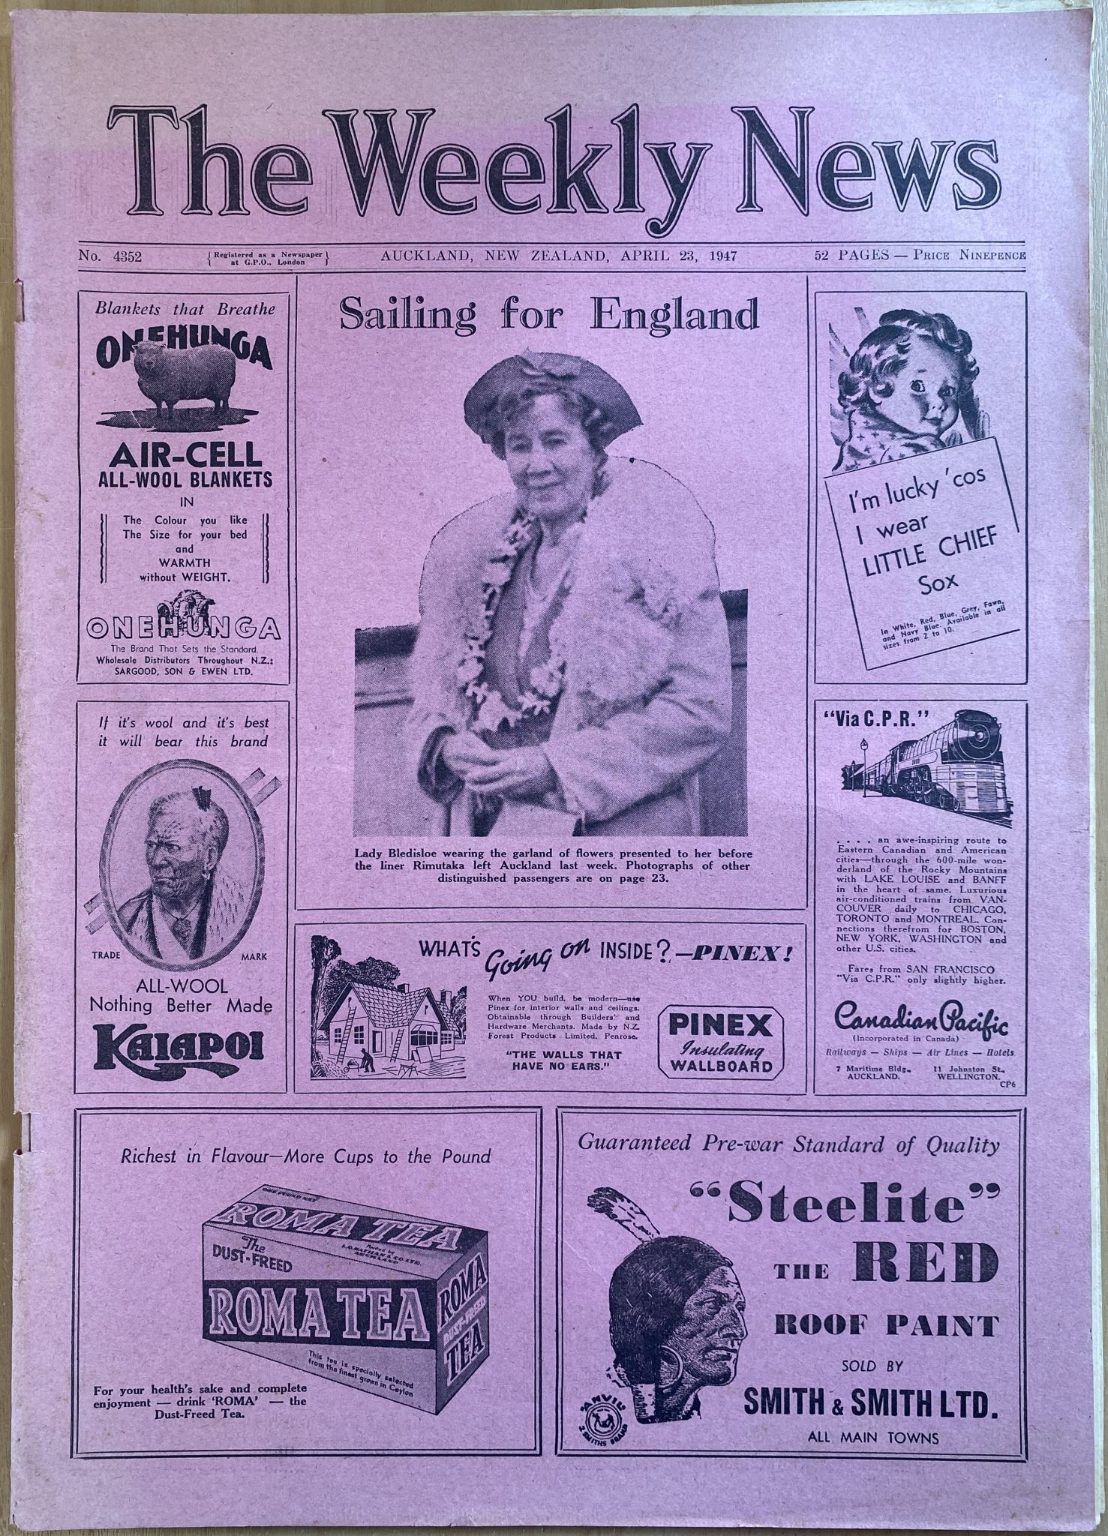 OLD NEWSPAPER: The Weekly News, No. 4352, 23 April 1947